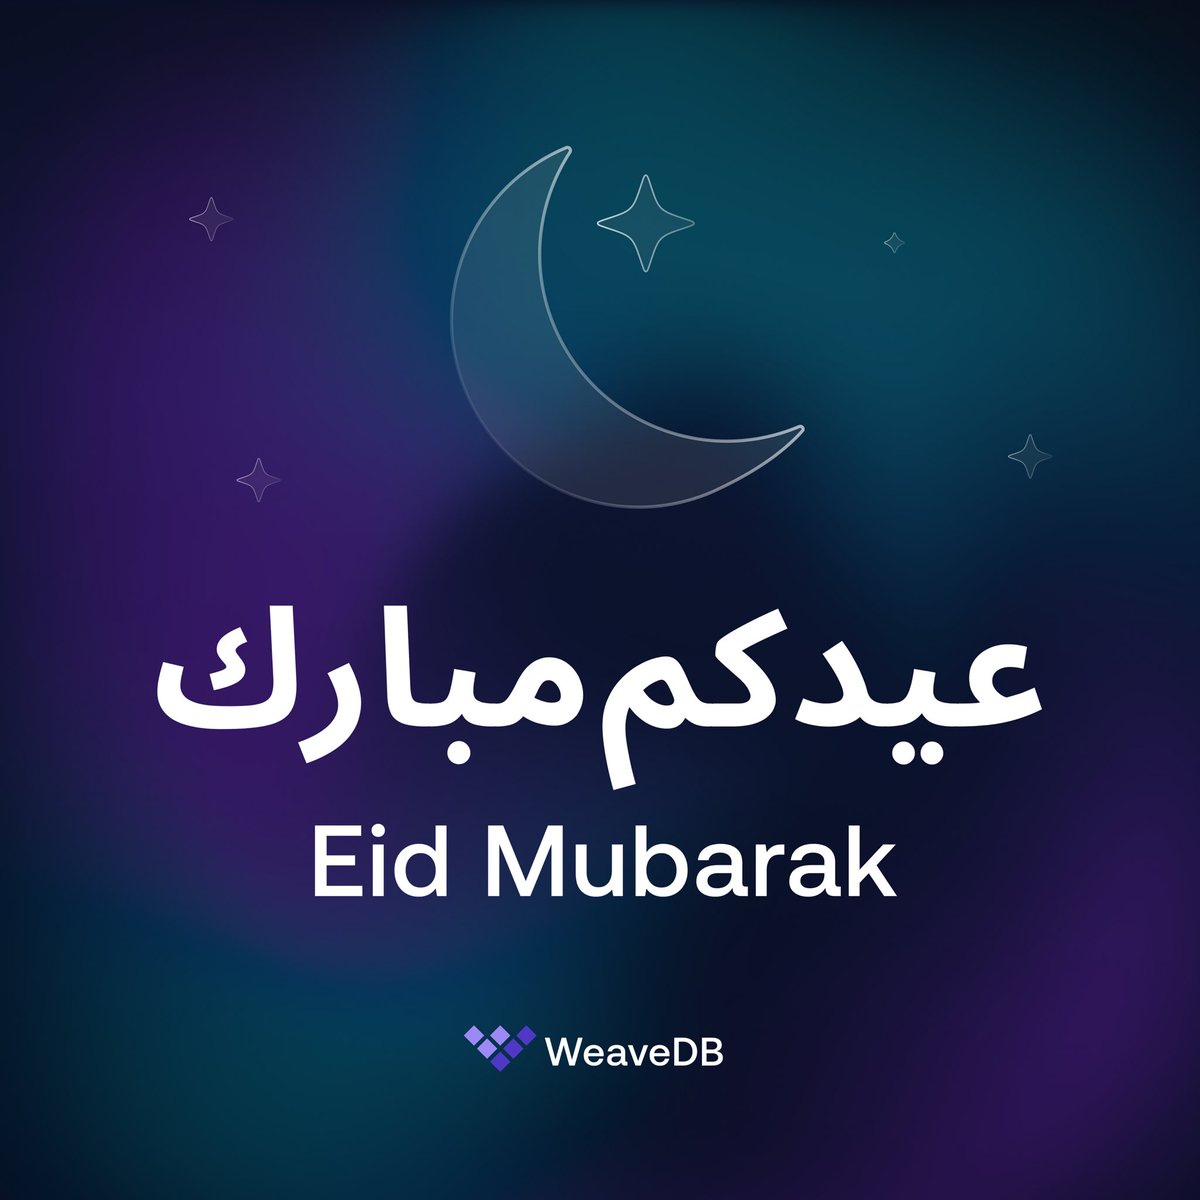 From all of us at WeaveDB, we wish you and your families an Eid Mubarak! ❤️🌙